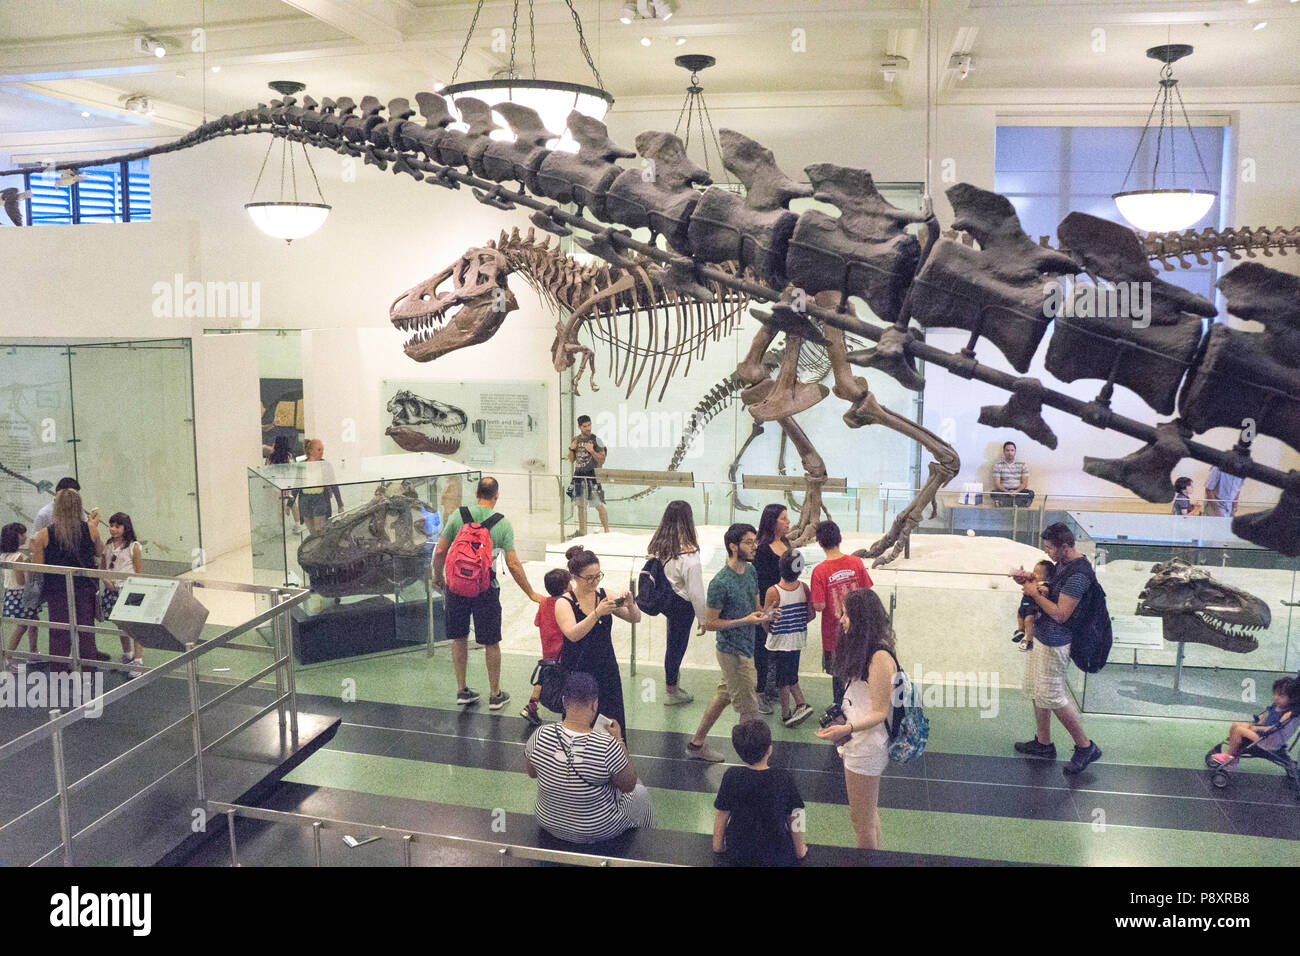 2 huge dinosaurs Apatosaurus tail in foreground overlooking diverse admirers all ages walking center aisle display & Tyrranosaurus rex skeleton beyond Stock Photo